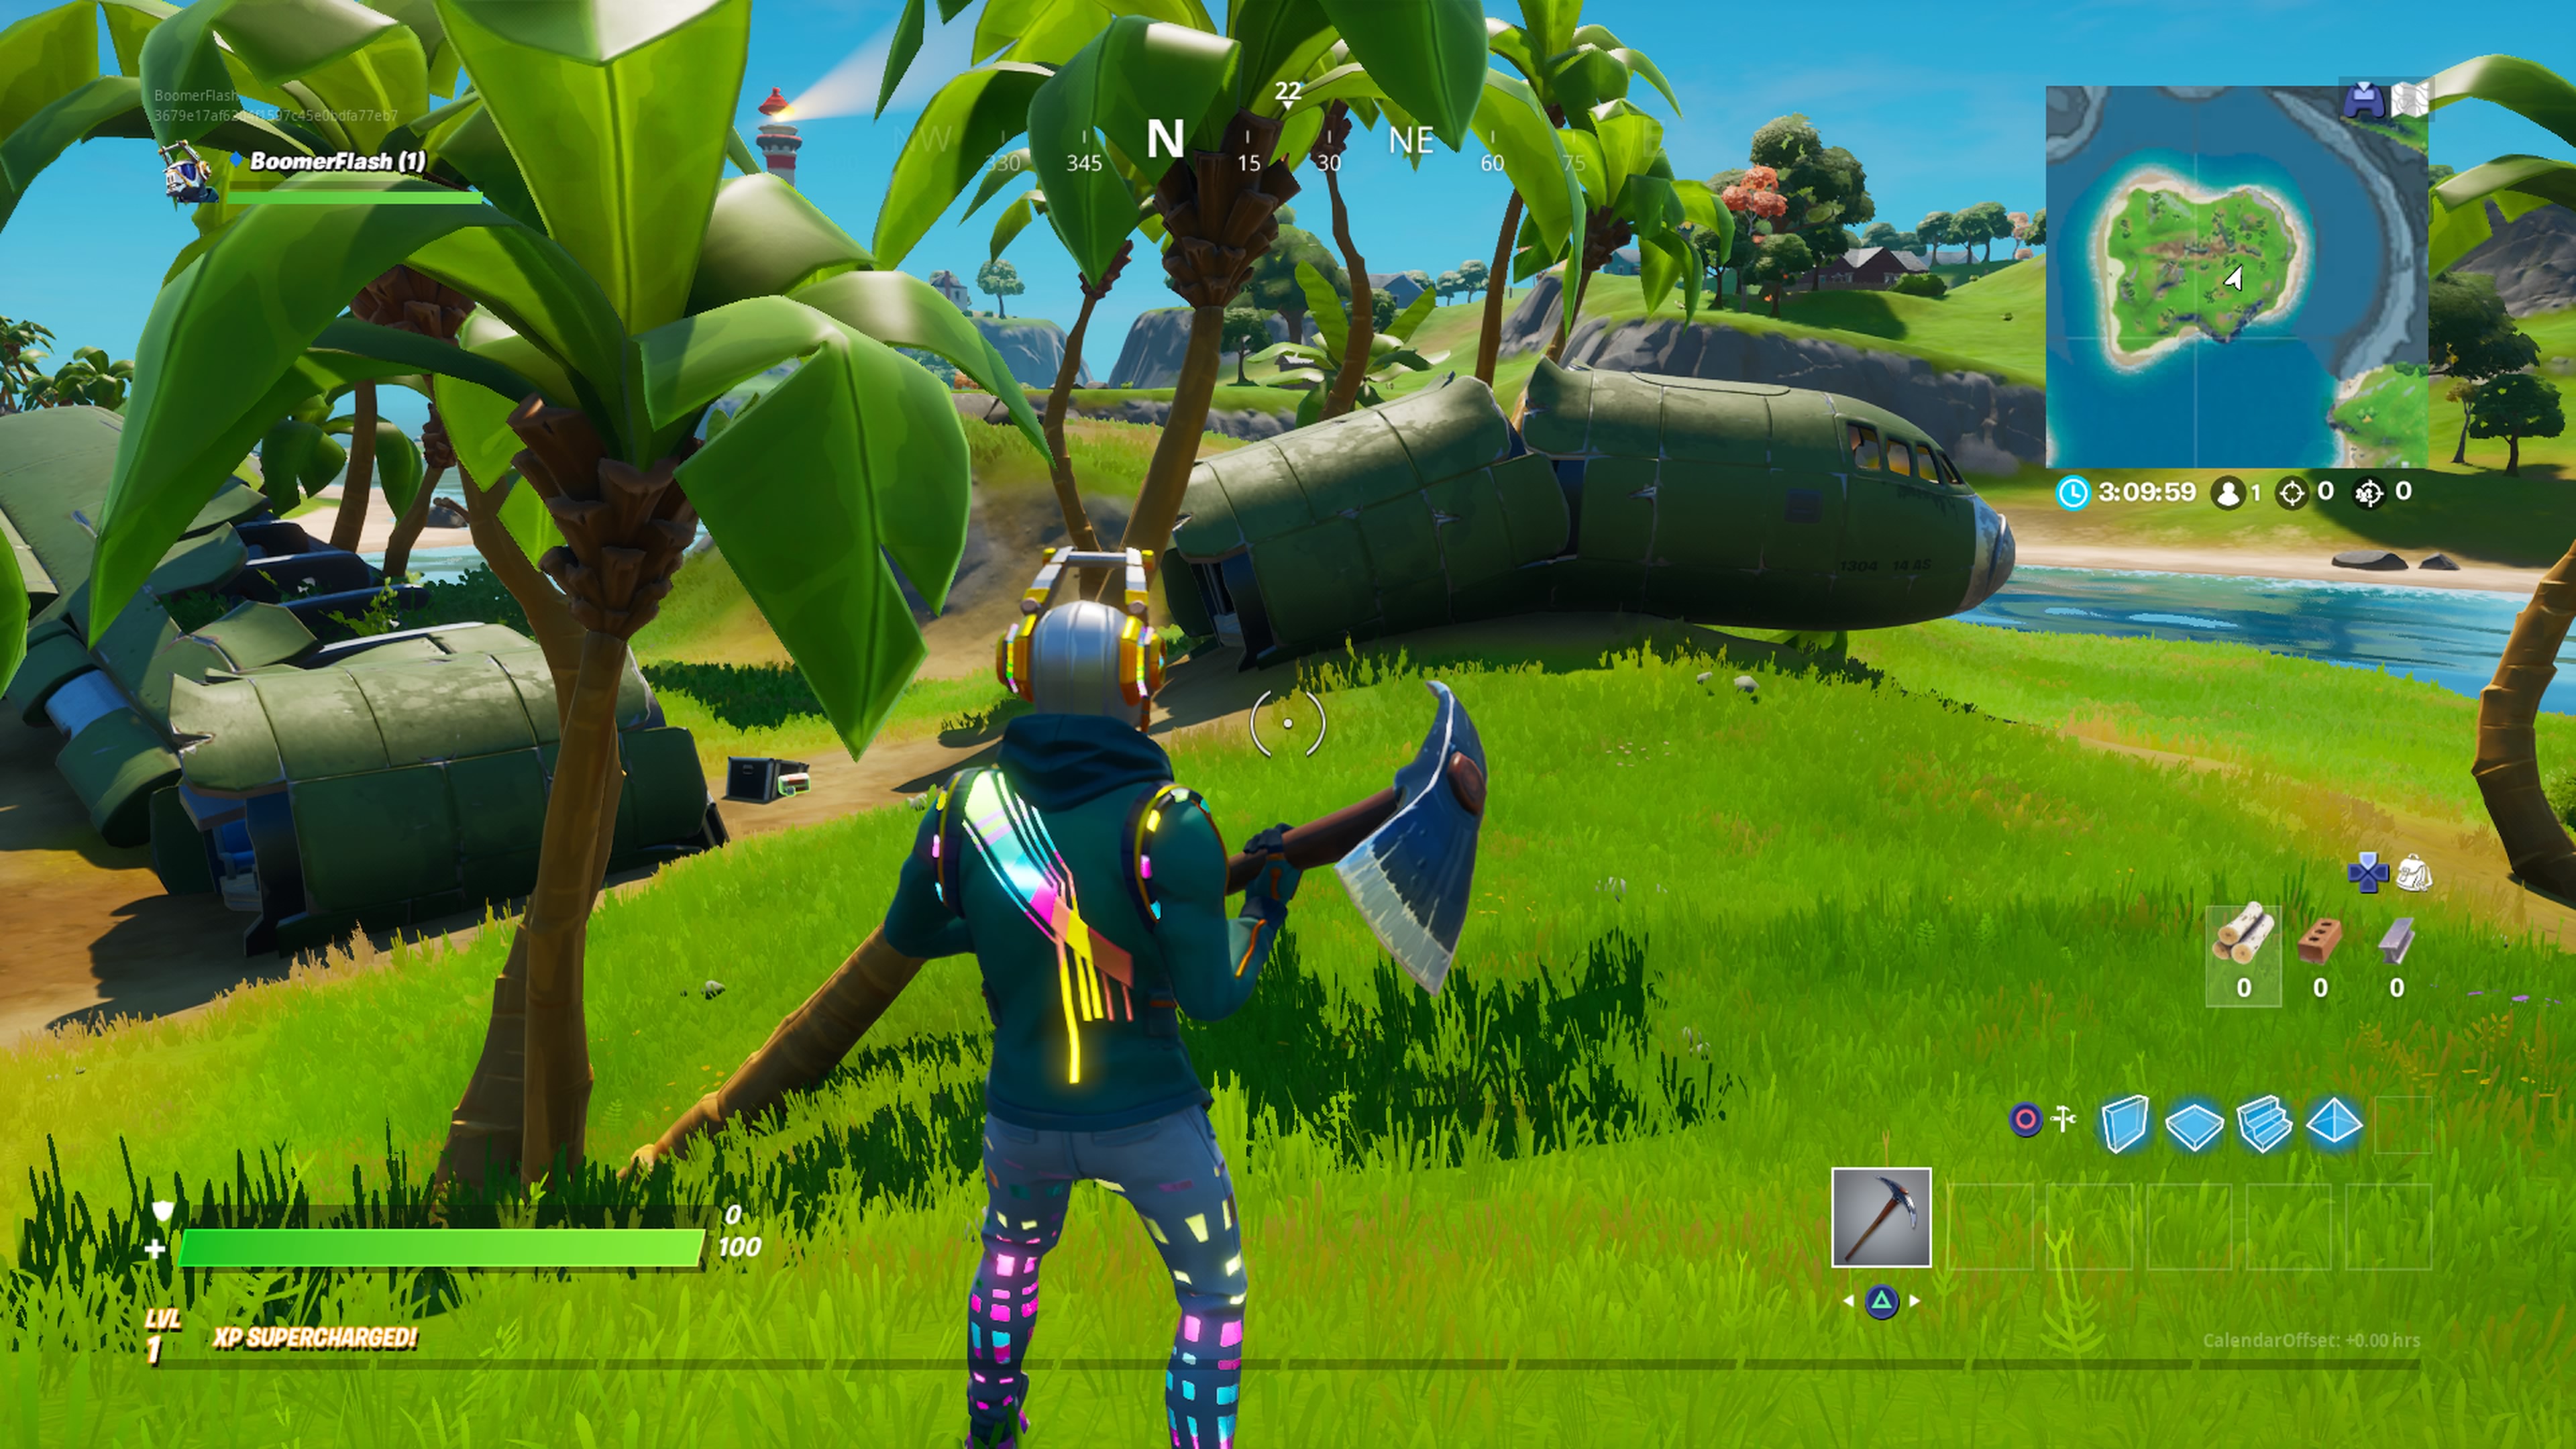 How to find and use Fortnite's jetpacks - Polygon